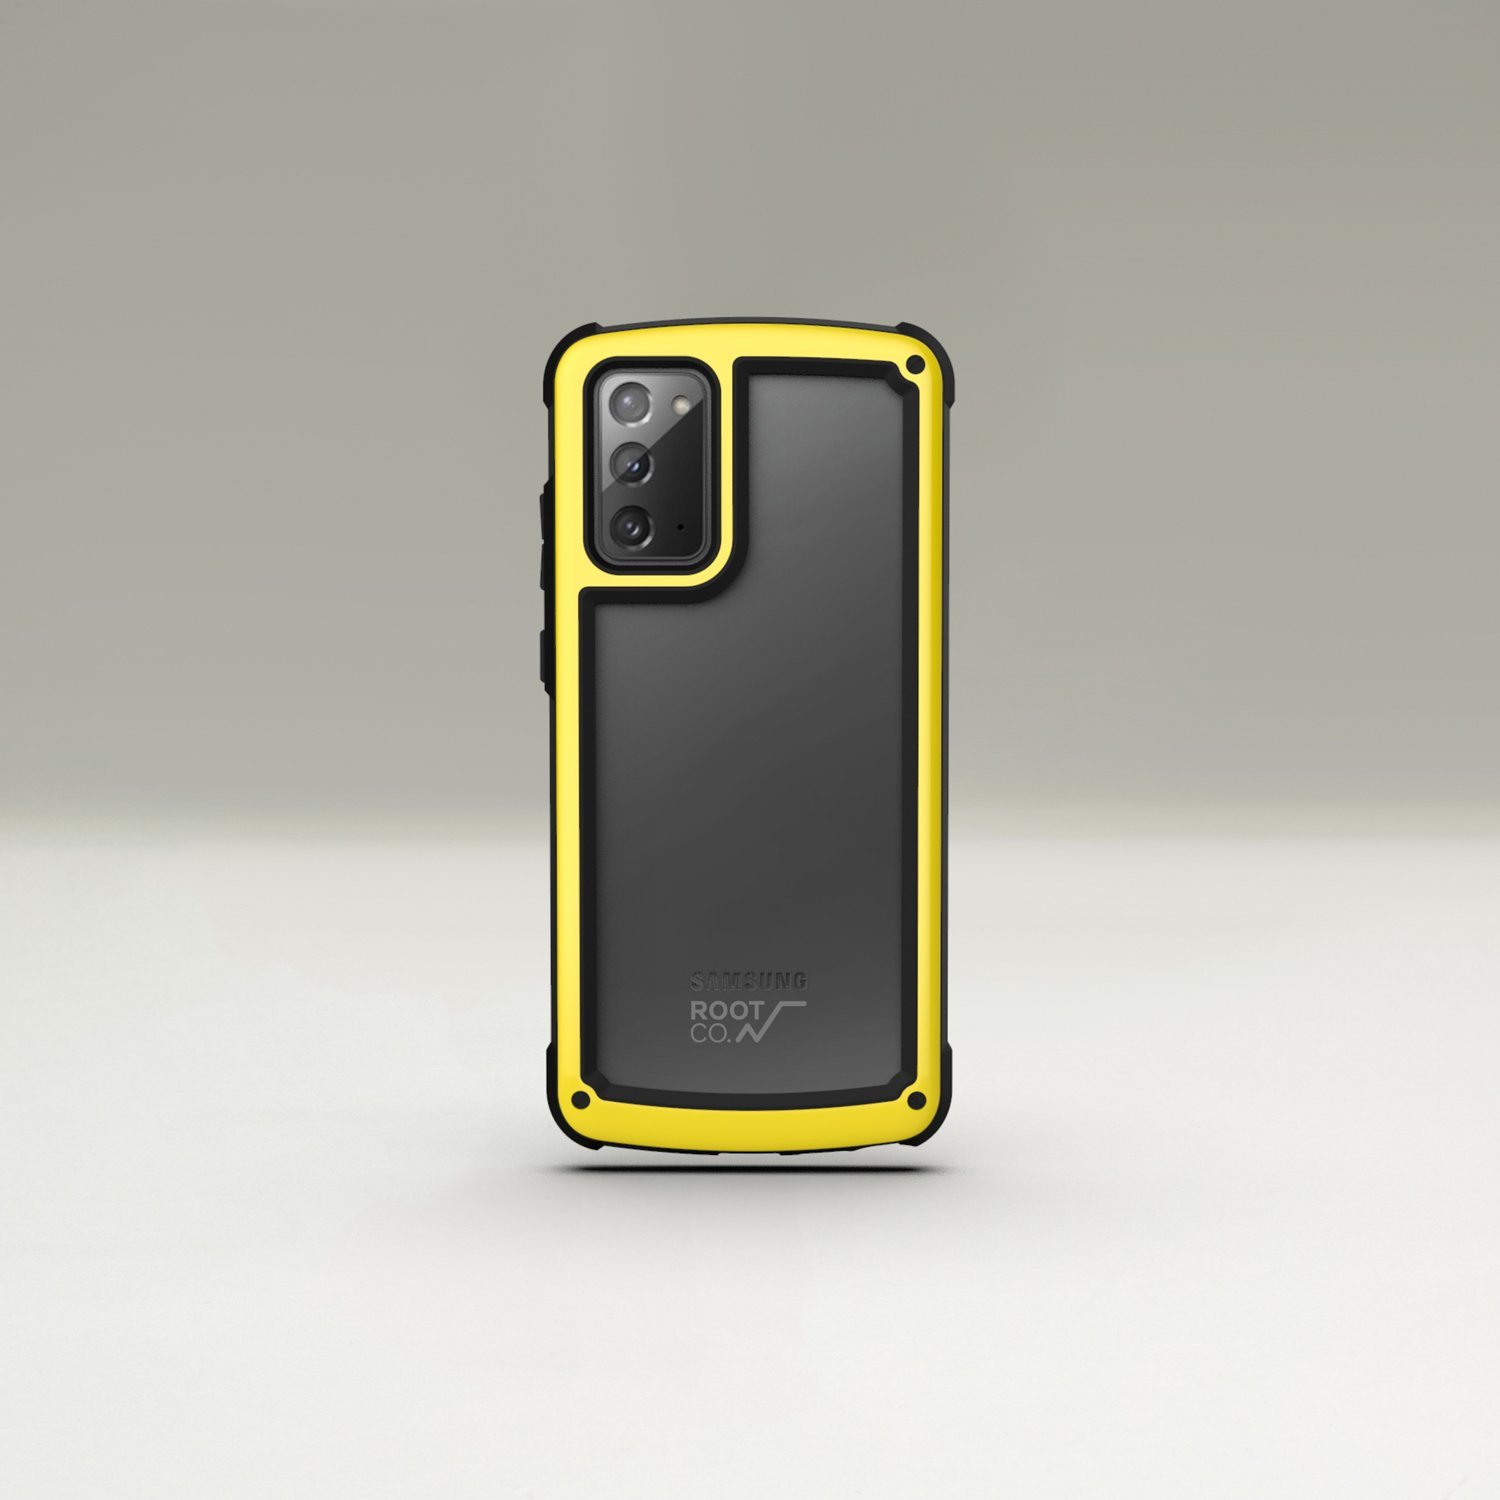 Root Co. Gravity Shock Resist Tough & Basic Case for Samsung Galaxy Note 20, Yellow Default ROOT CO. 